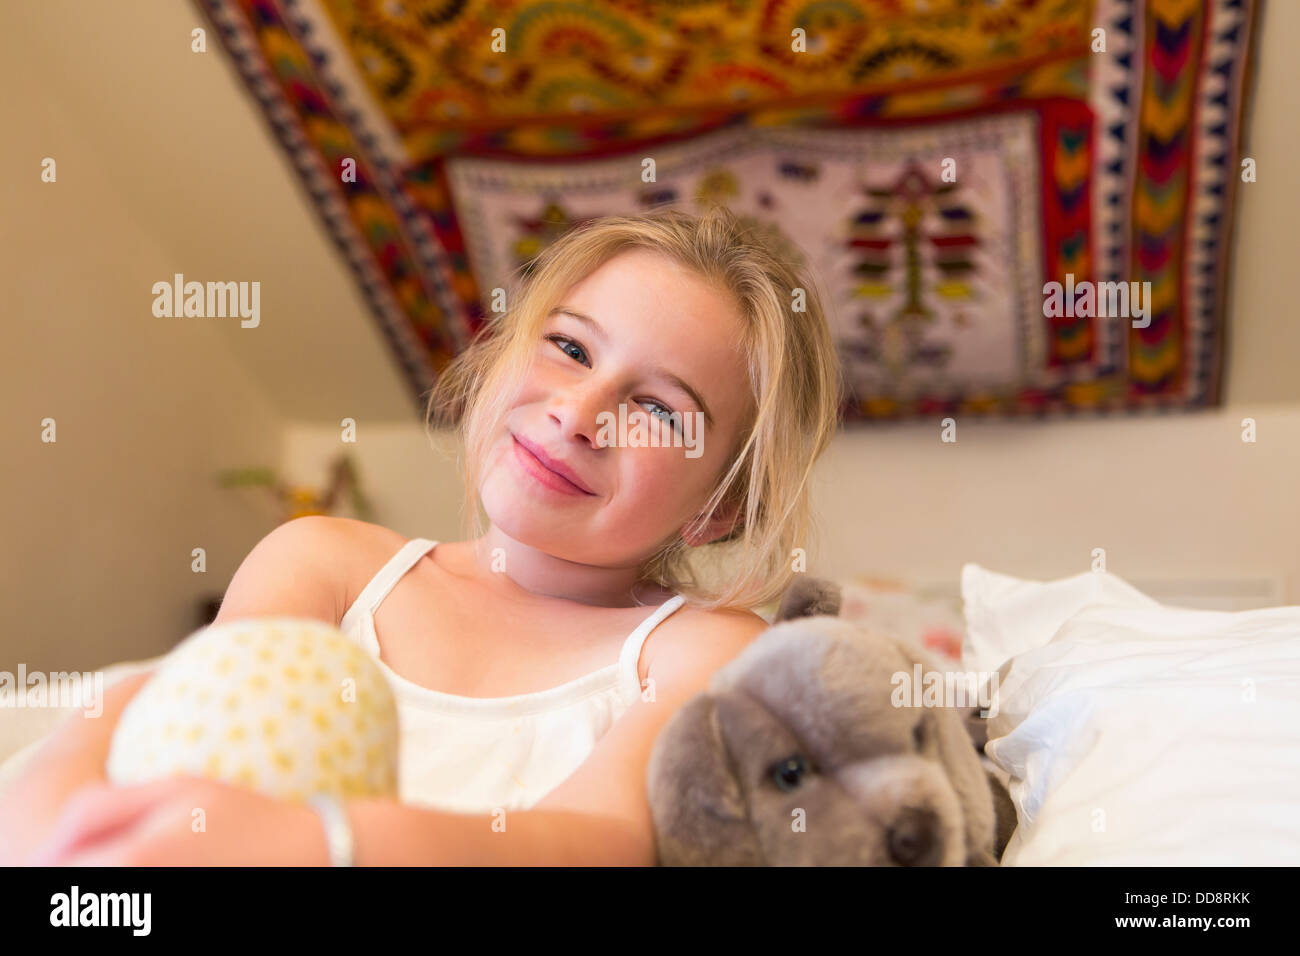 Caucasian girl smiling on sofa Banque D'Images